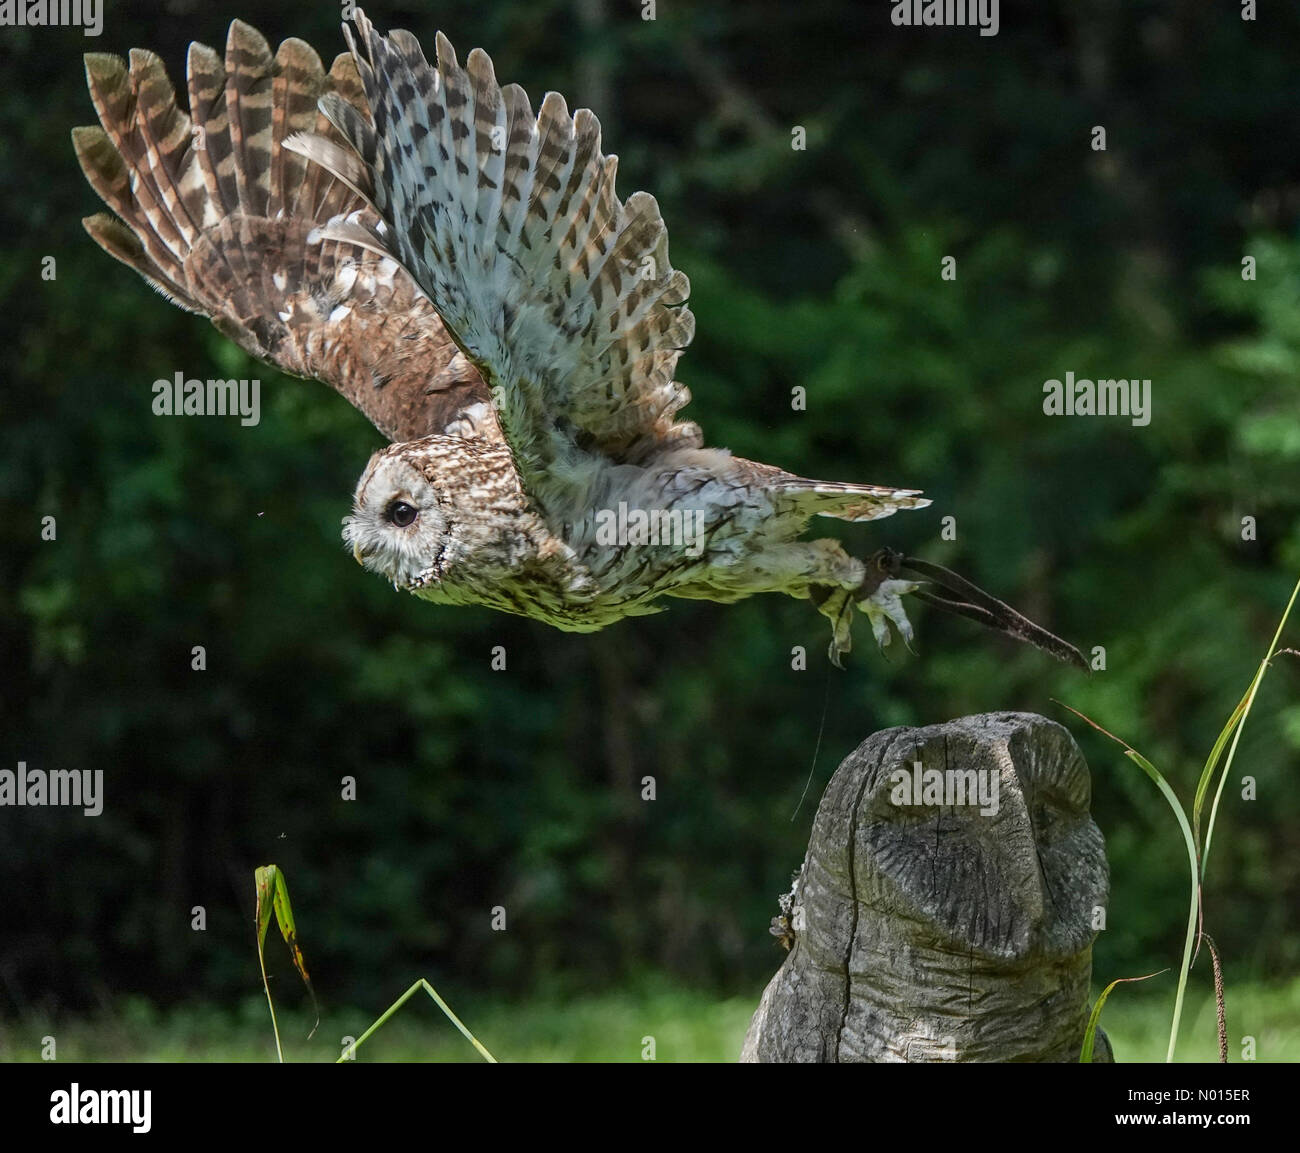 Kent, UK. 07th Aug, 2021. UK Weather: Sunny intervals in Kent. Wildwood Trust, Herne. 07th August 2021. Sunny intervals between the showers across Kent. A short eared owl in flight at Wildwood near Canterbury in Kent. Credit: jamesjagger/StockimoNews/Alamy Live News Credit: jamesjagger / StockimoNews/Alamy Live News Stock Photo